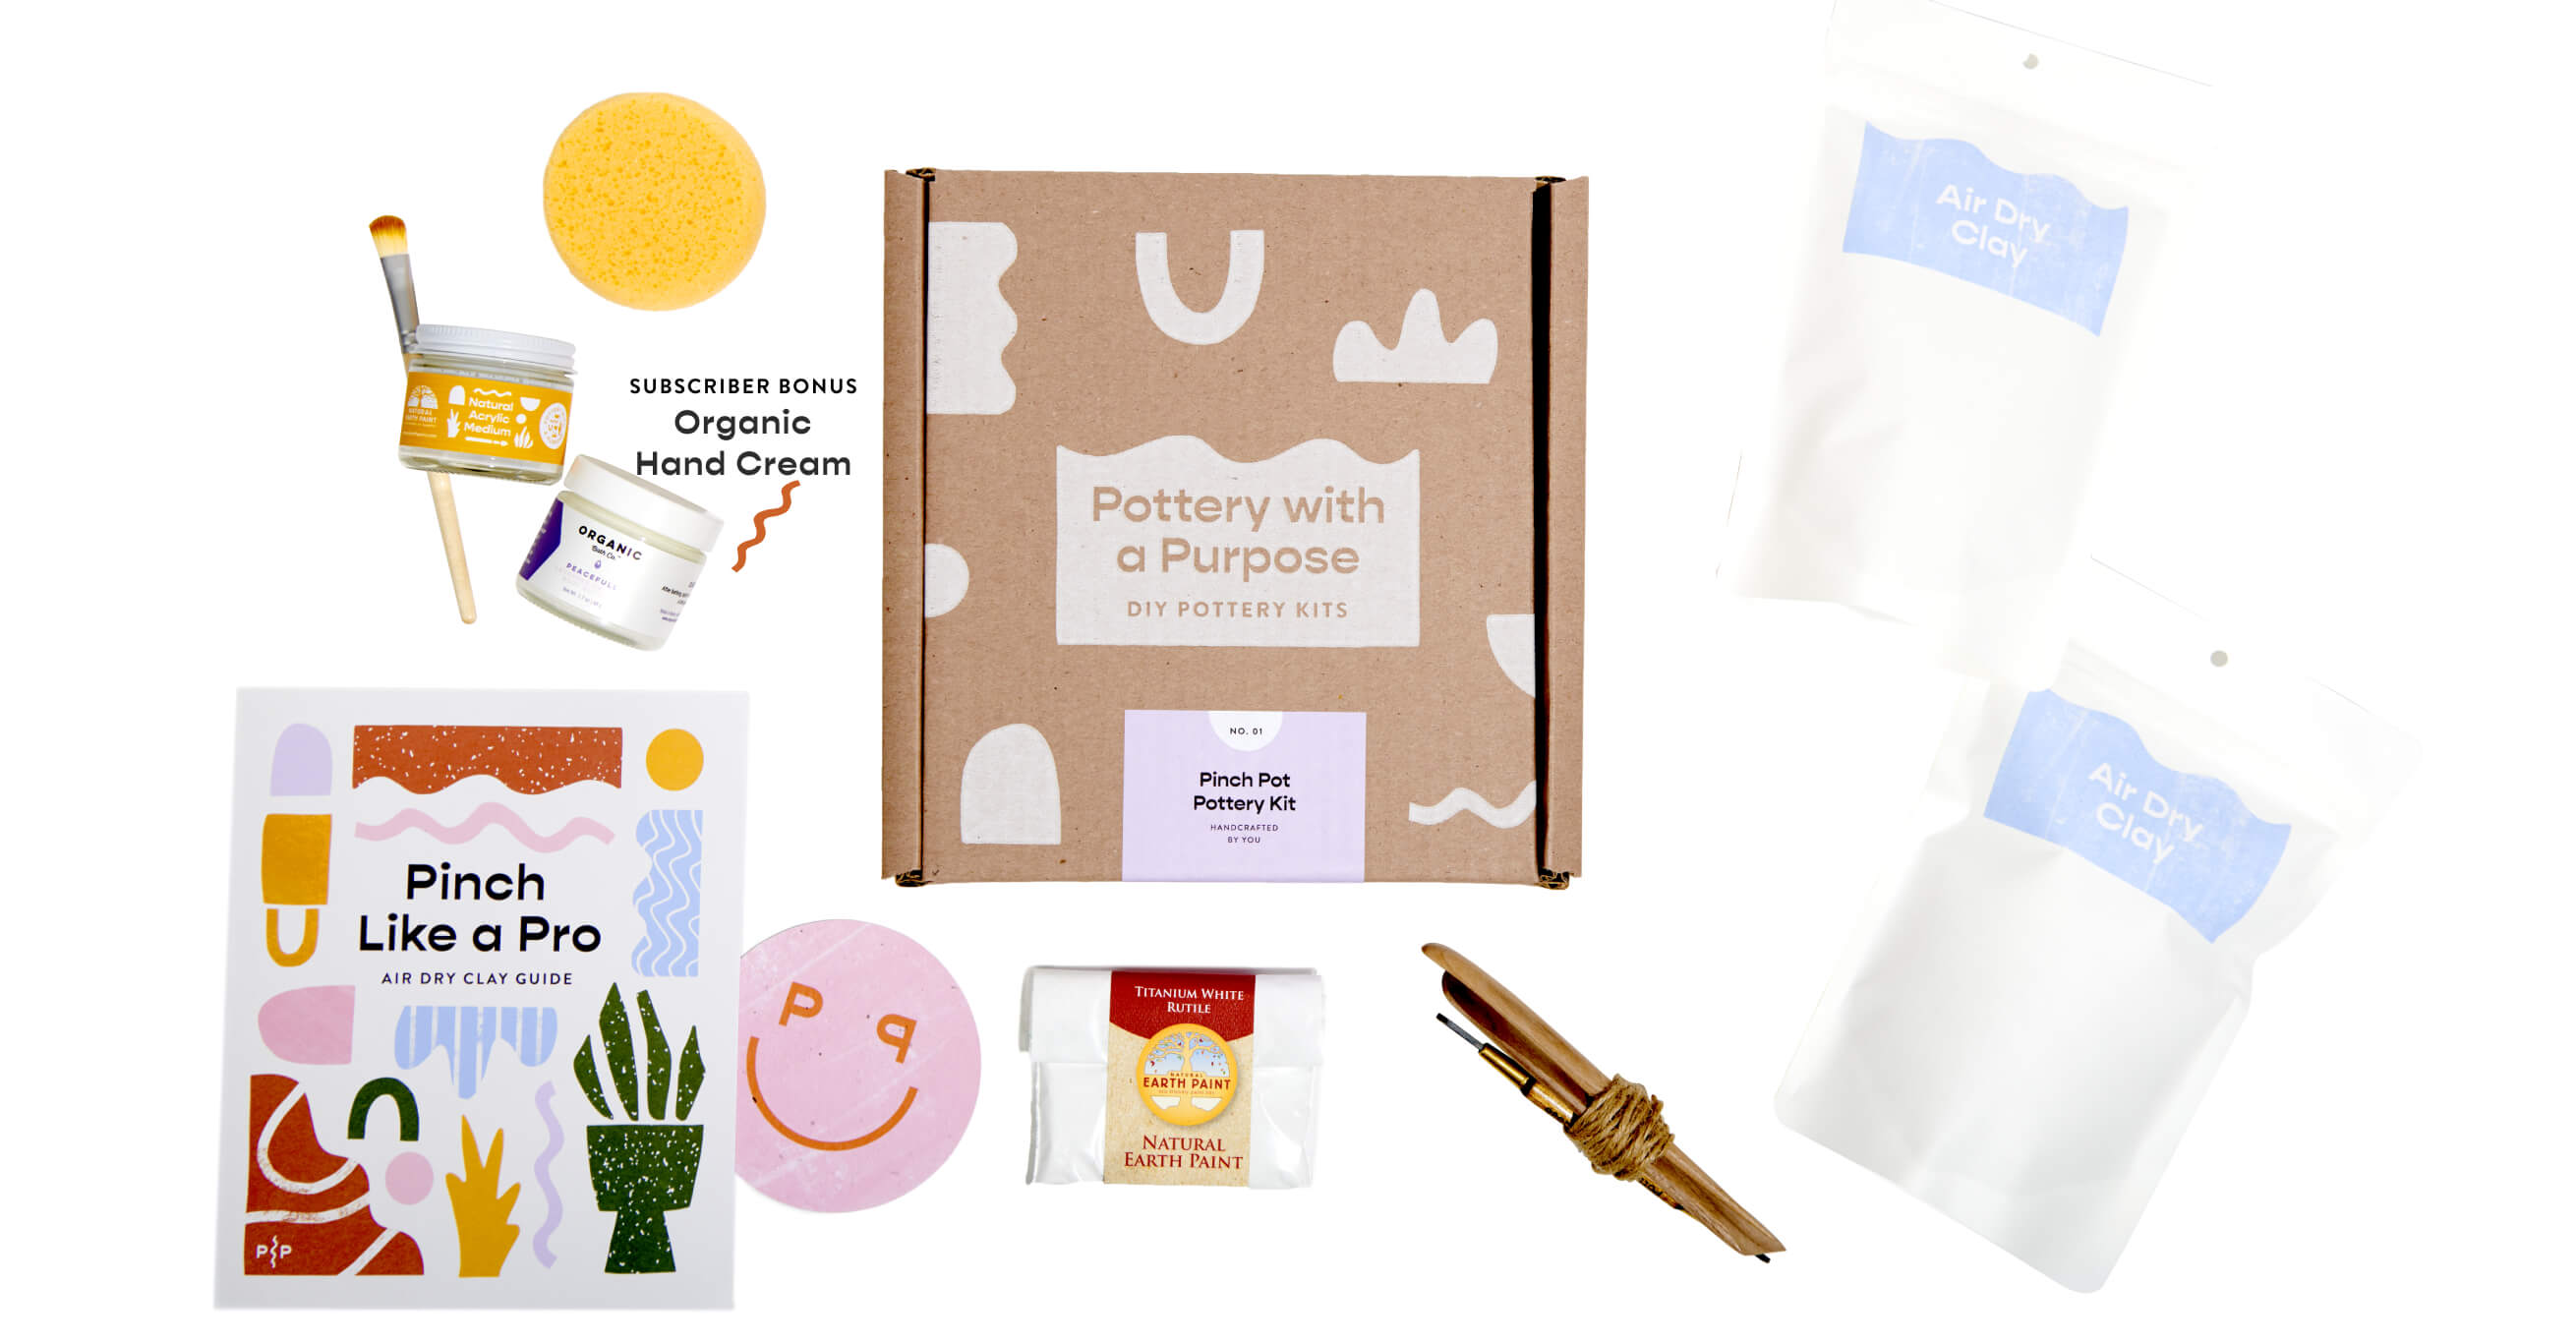 Included with your make at home air dry clay kit is sculting tools, a sponge, a koster, your ping guide, acrylic paint, a vegan paintbrush, powder paint and subscription members also get a bonus hand cream.